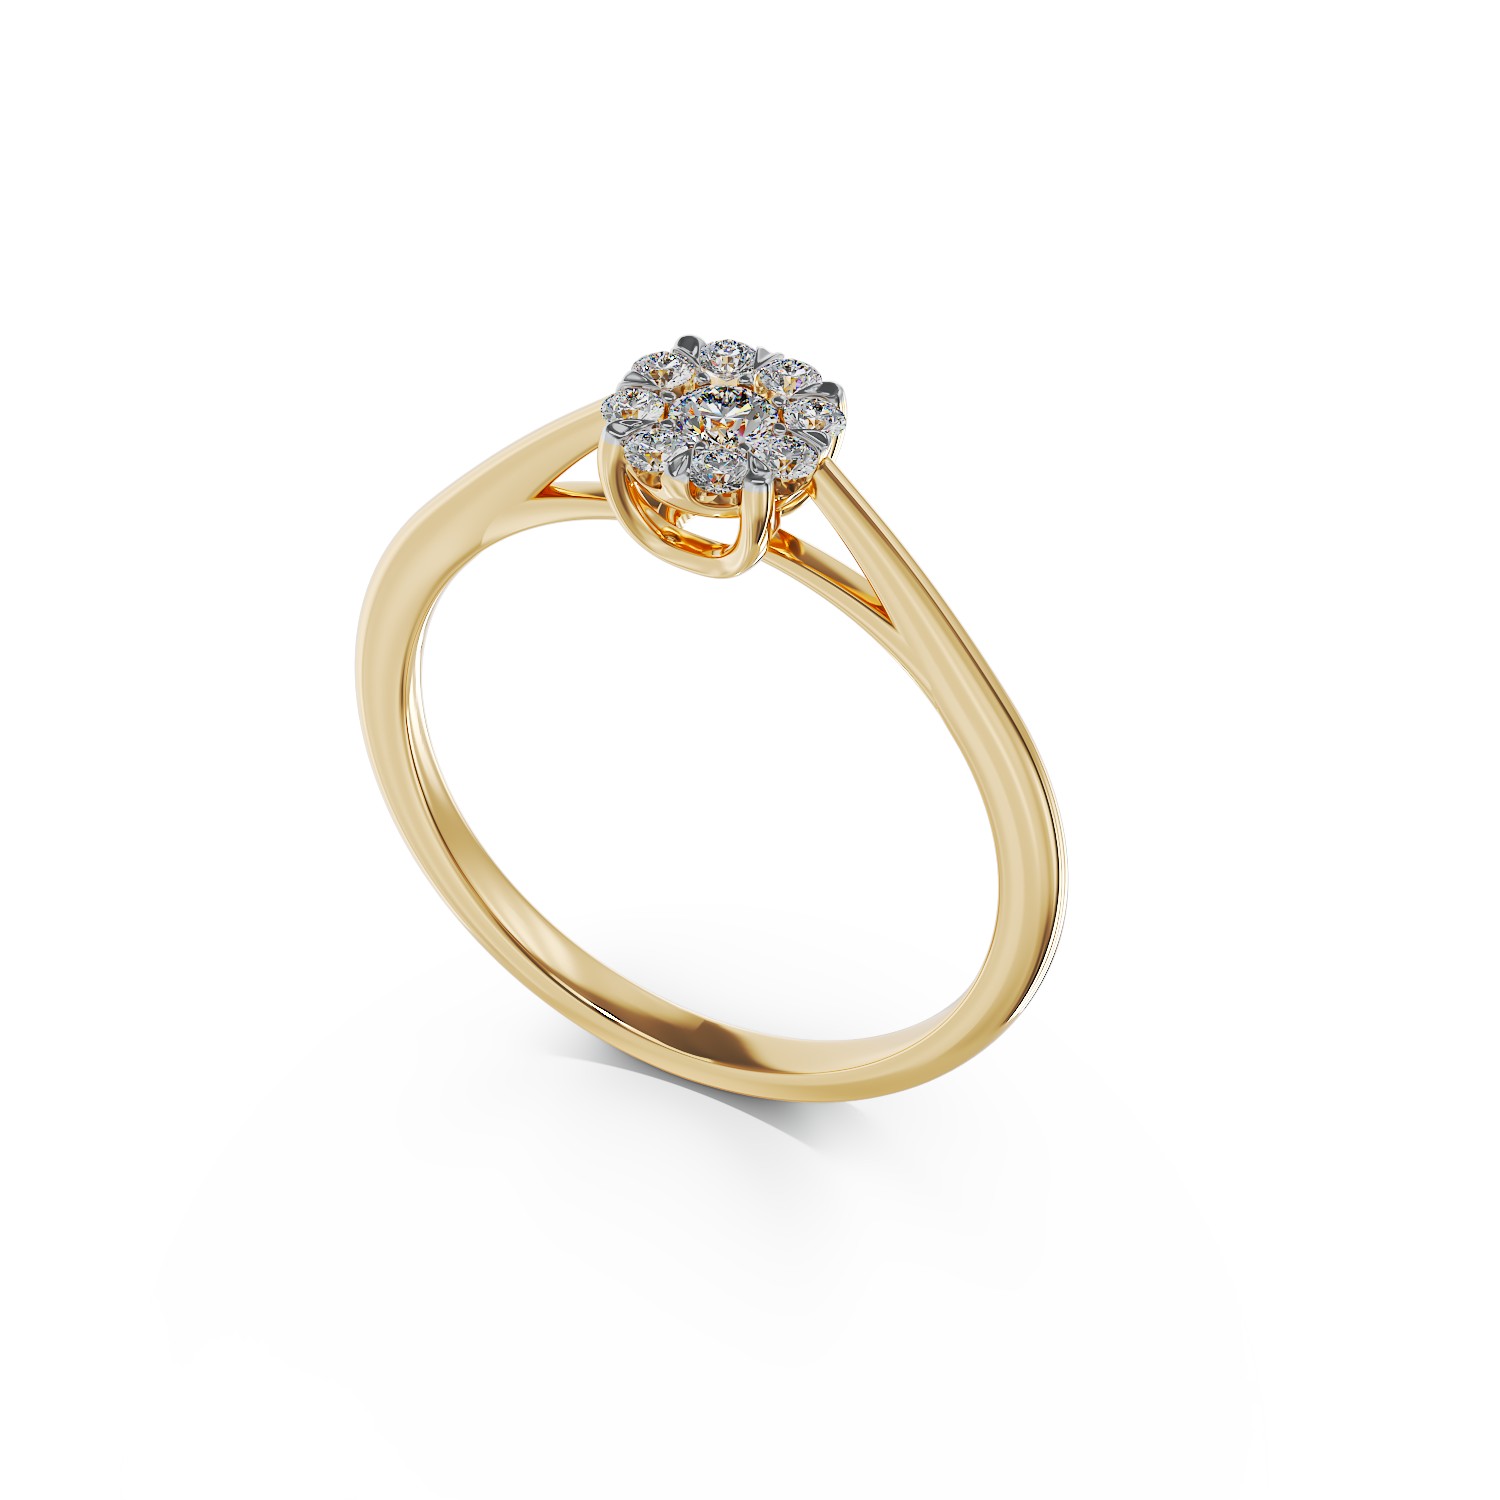 14K yellow gold engagement ring with 0.10ct diamonds